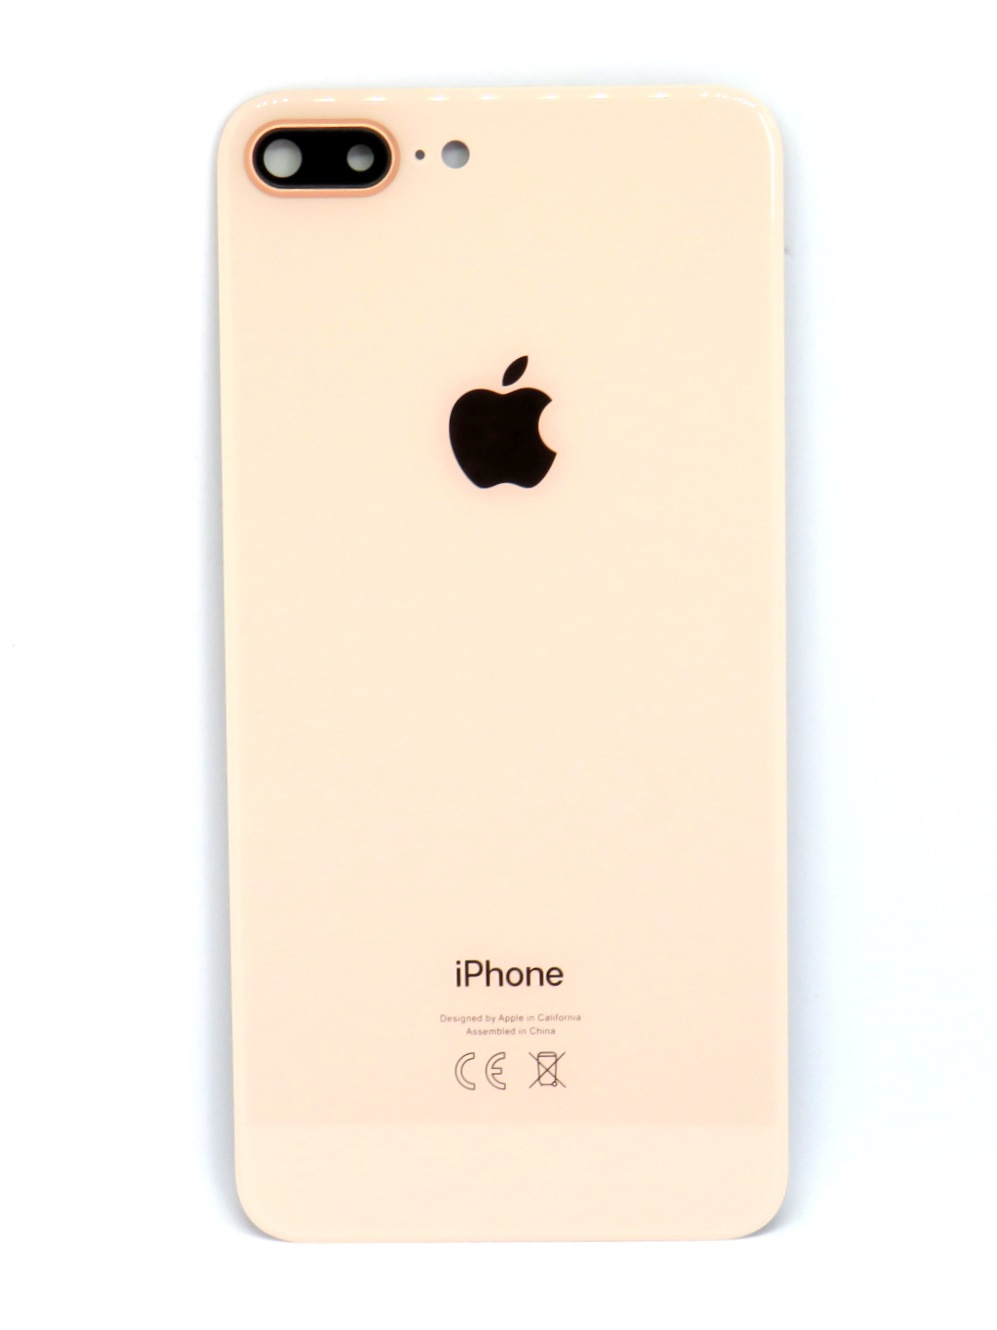 iPhone 8 Plus back glass + camera lens glass - gold color